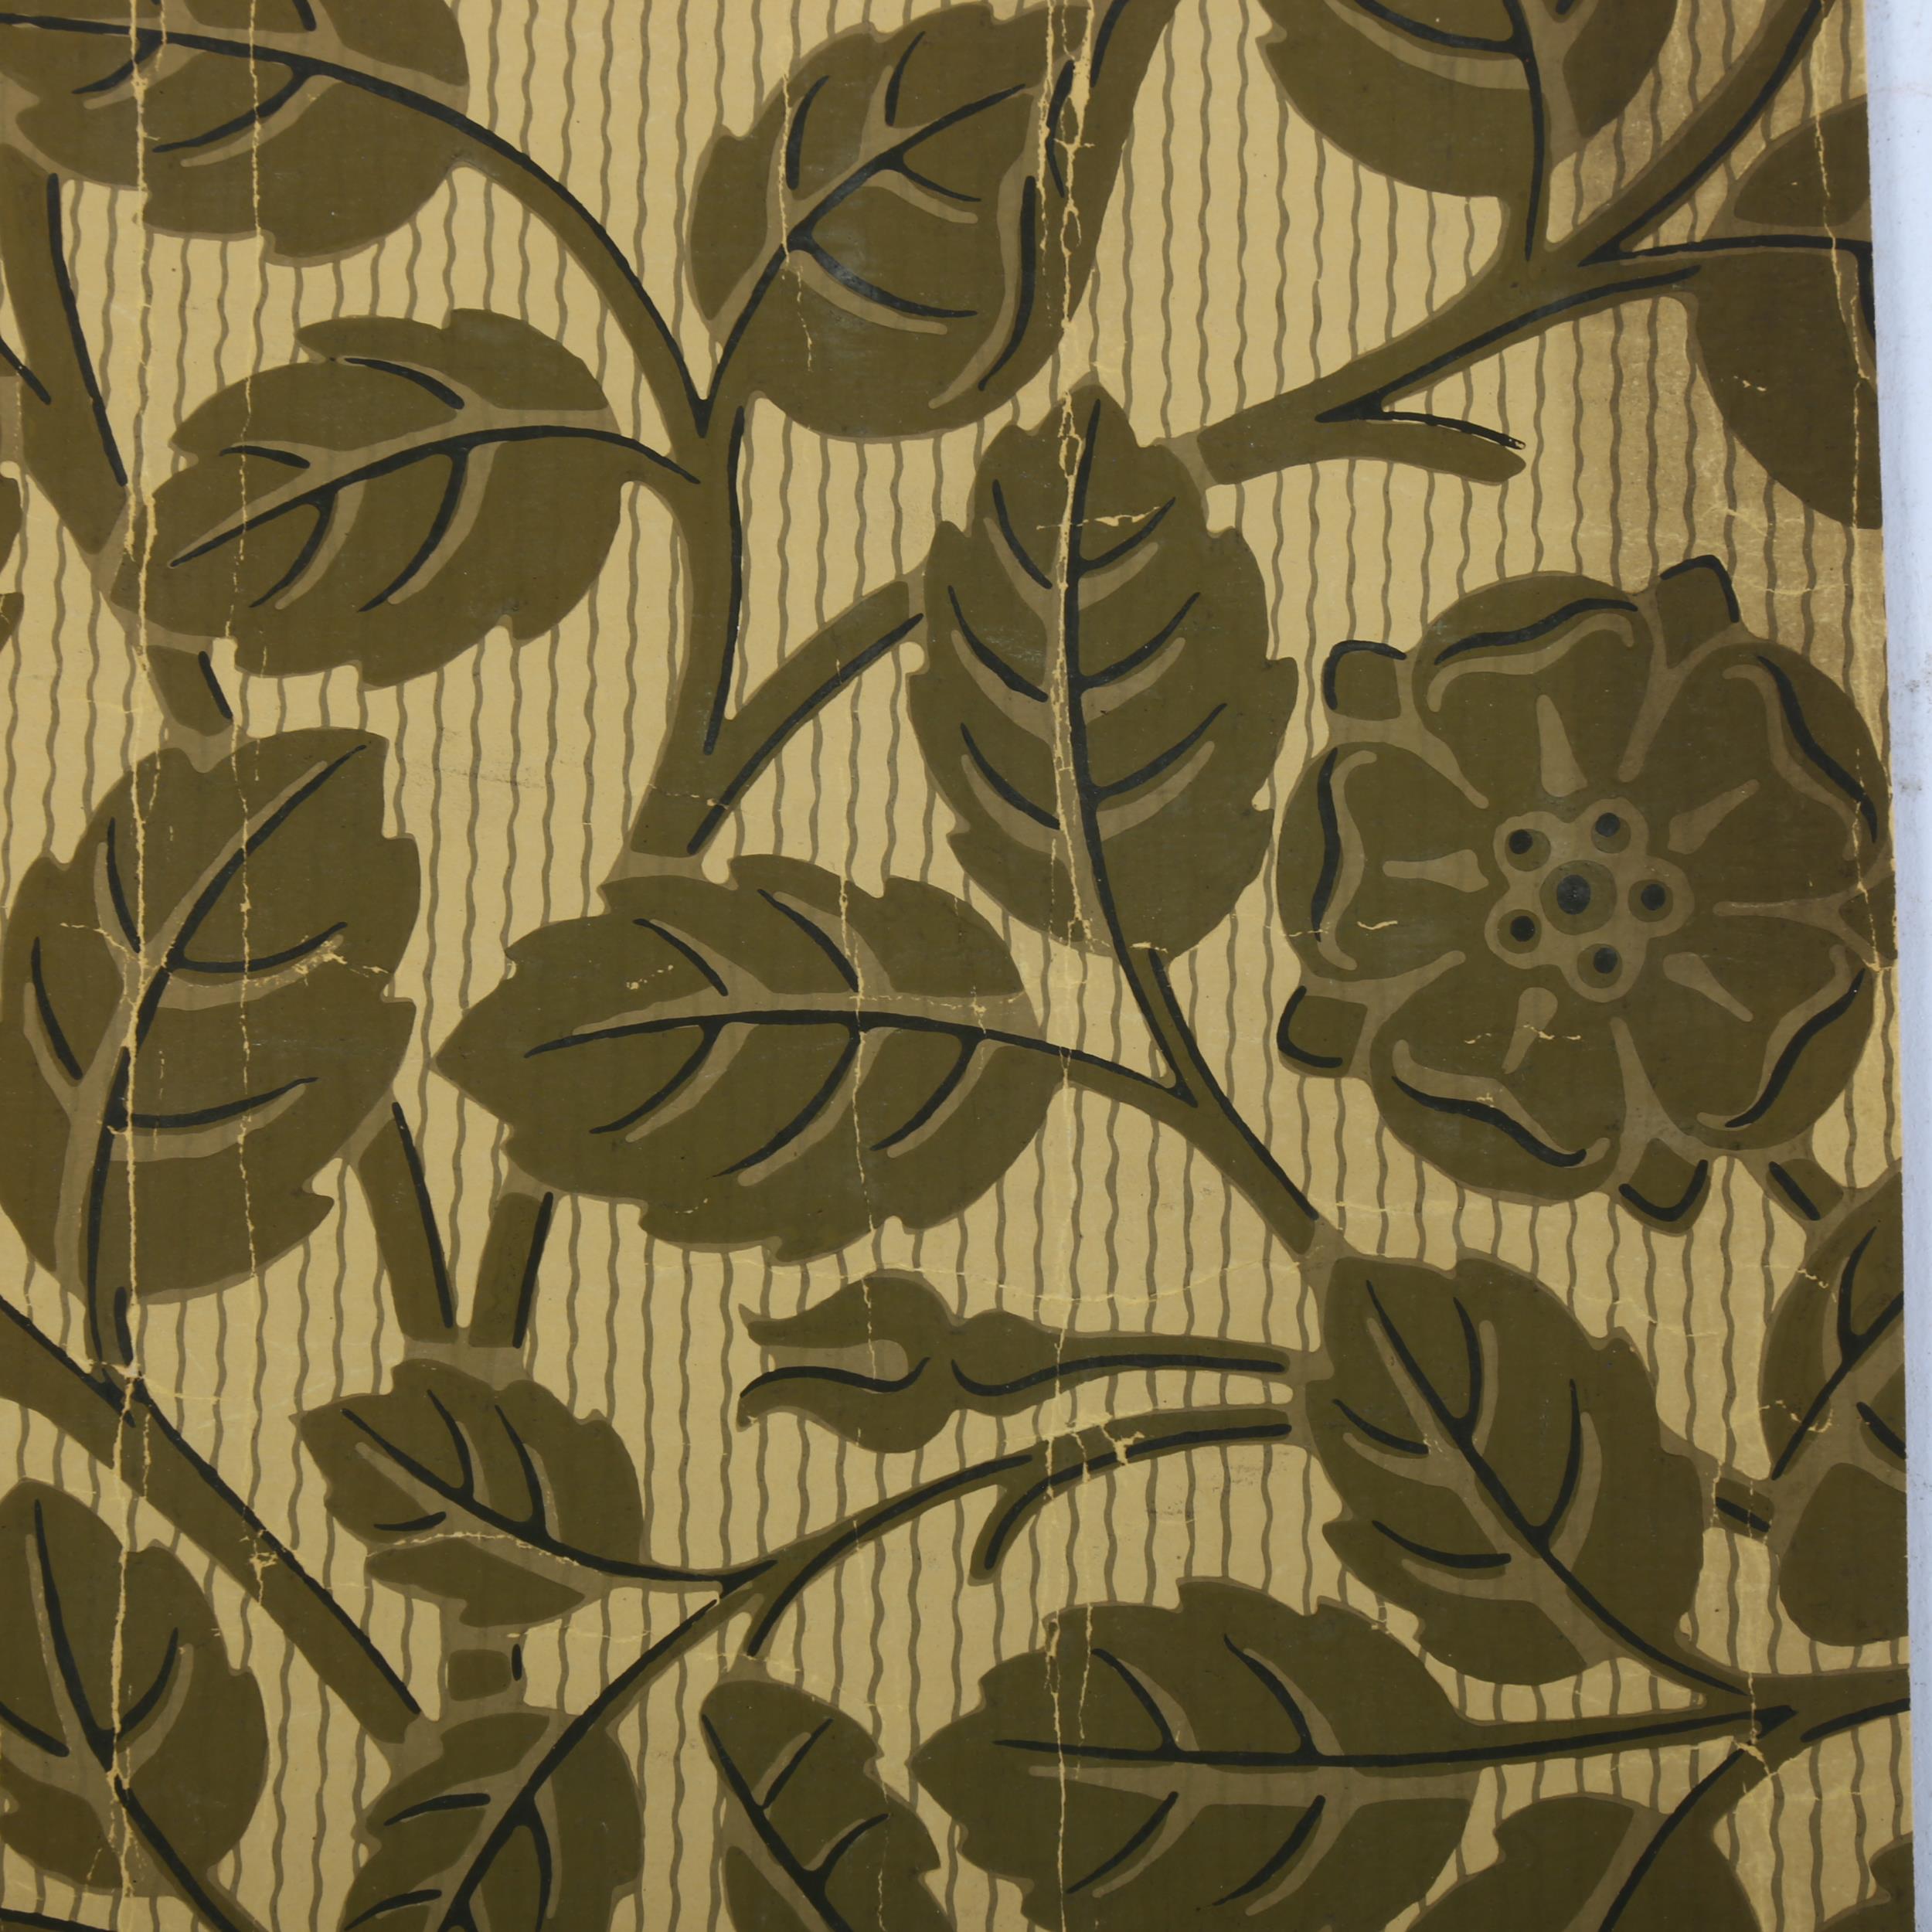 Late 18th/early 19th century wallpaper samples from a house of Thomas Carlyle Chelsea, 21cm x - Image 3 of 4